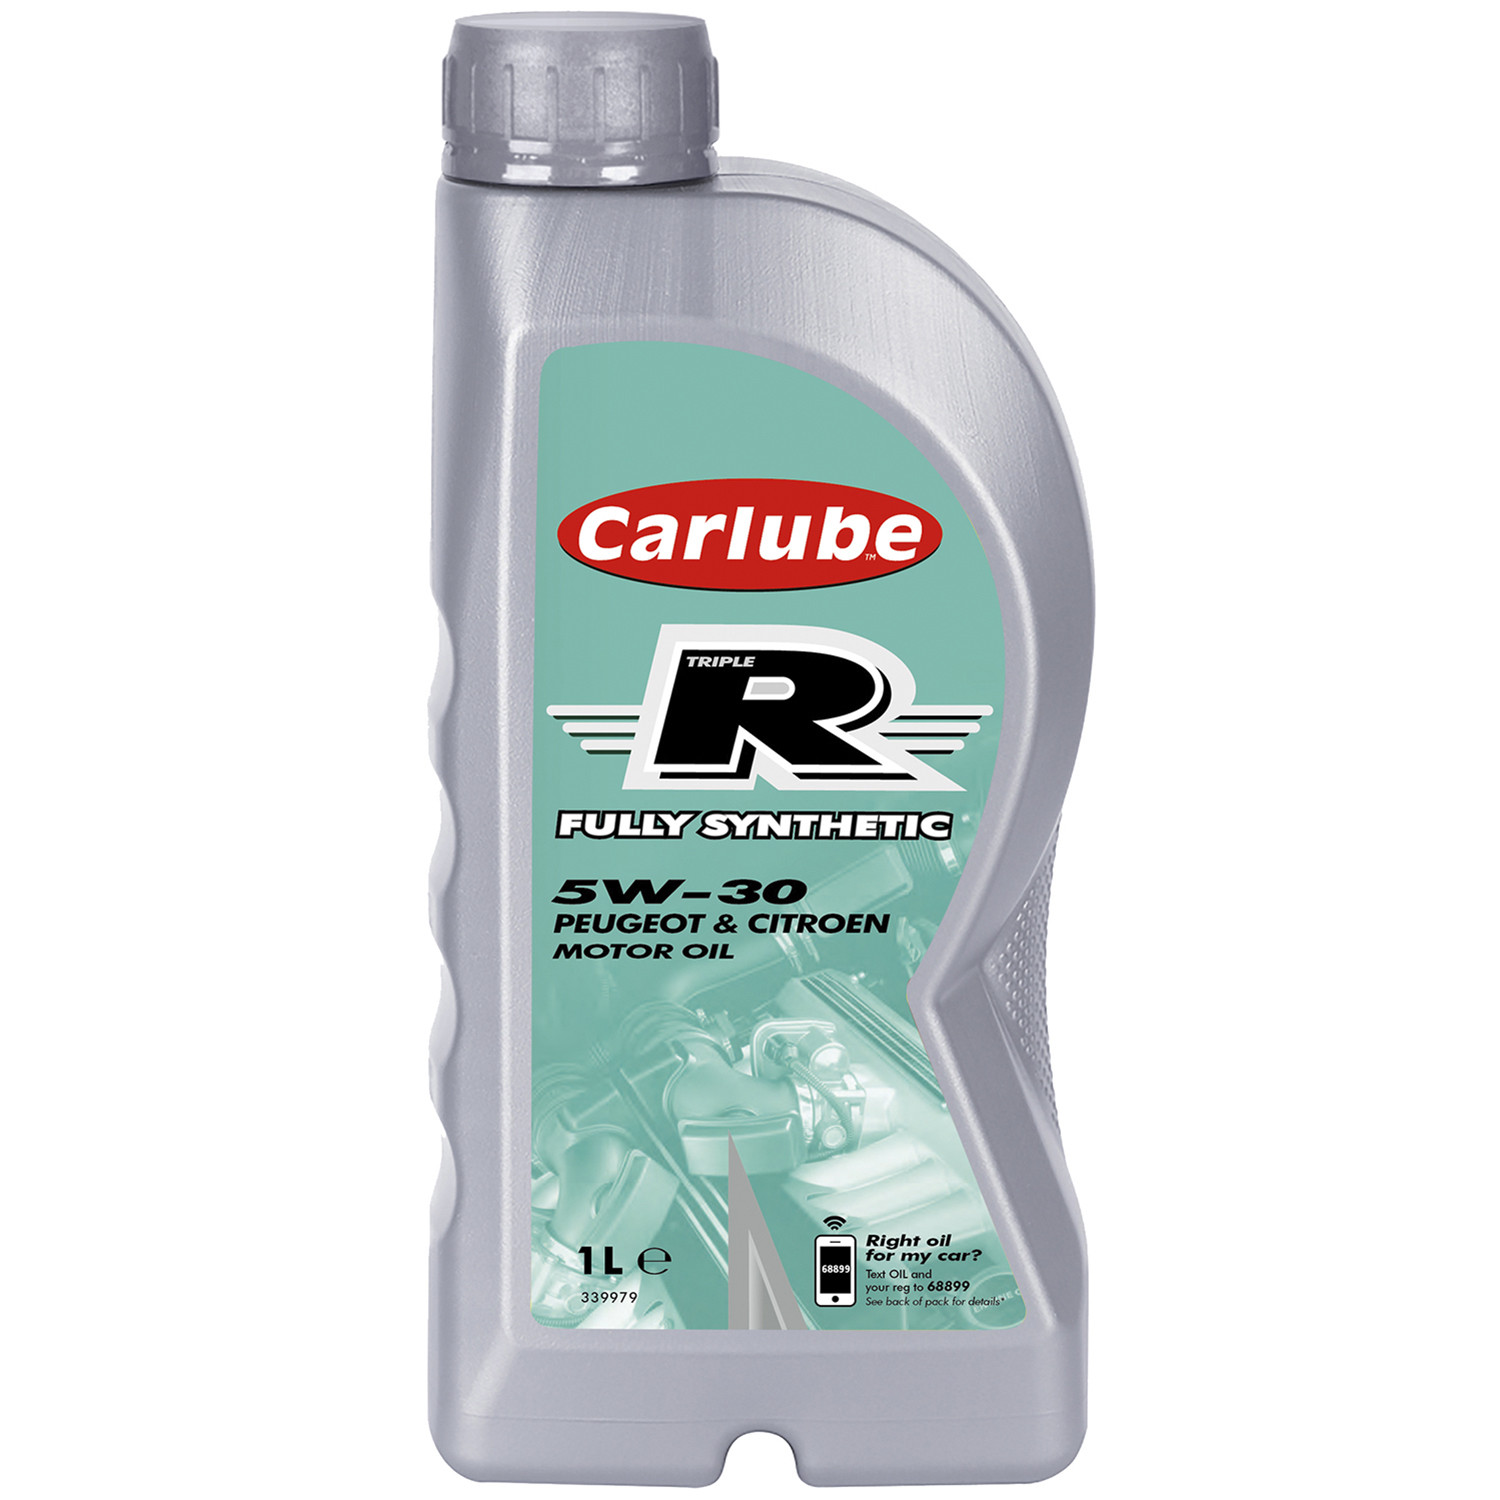 Triple R Fully Synthetic 5W30 Peugeot and Citroen Motor Oil - 1l Image